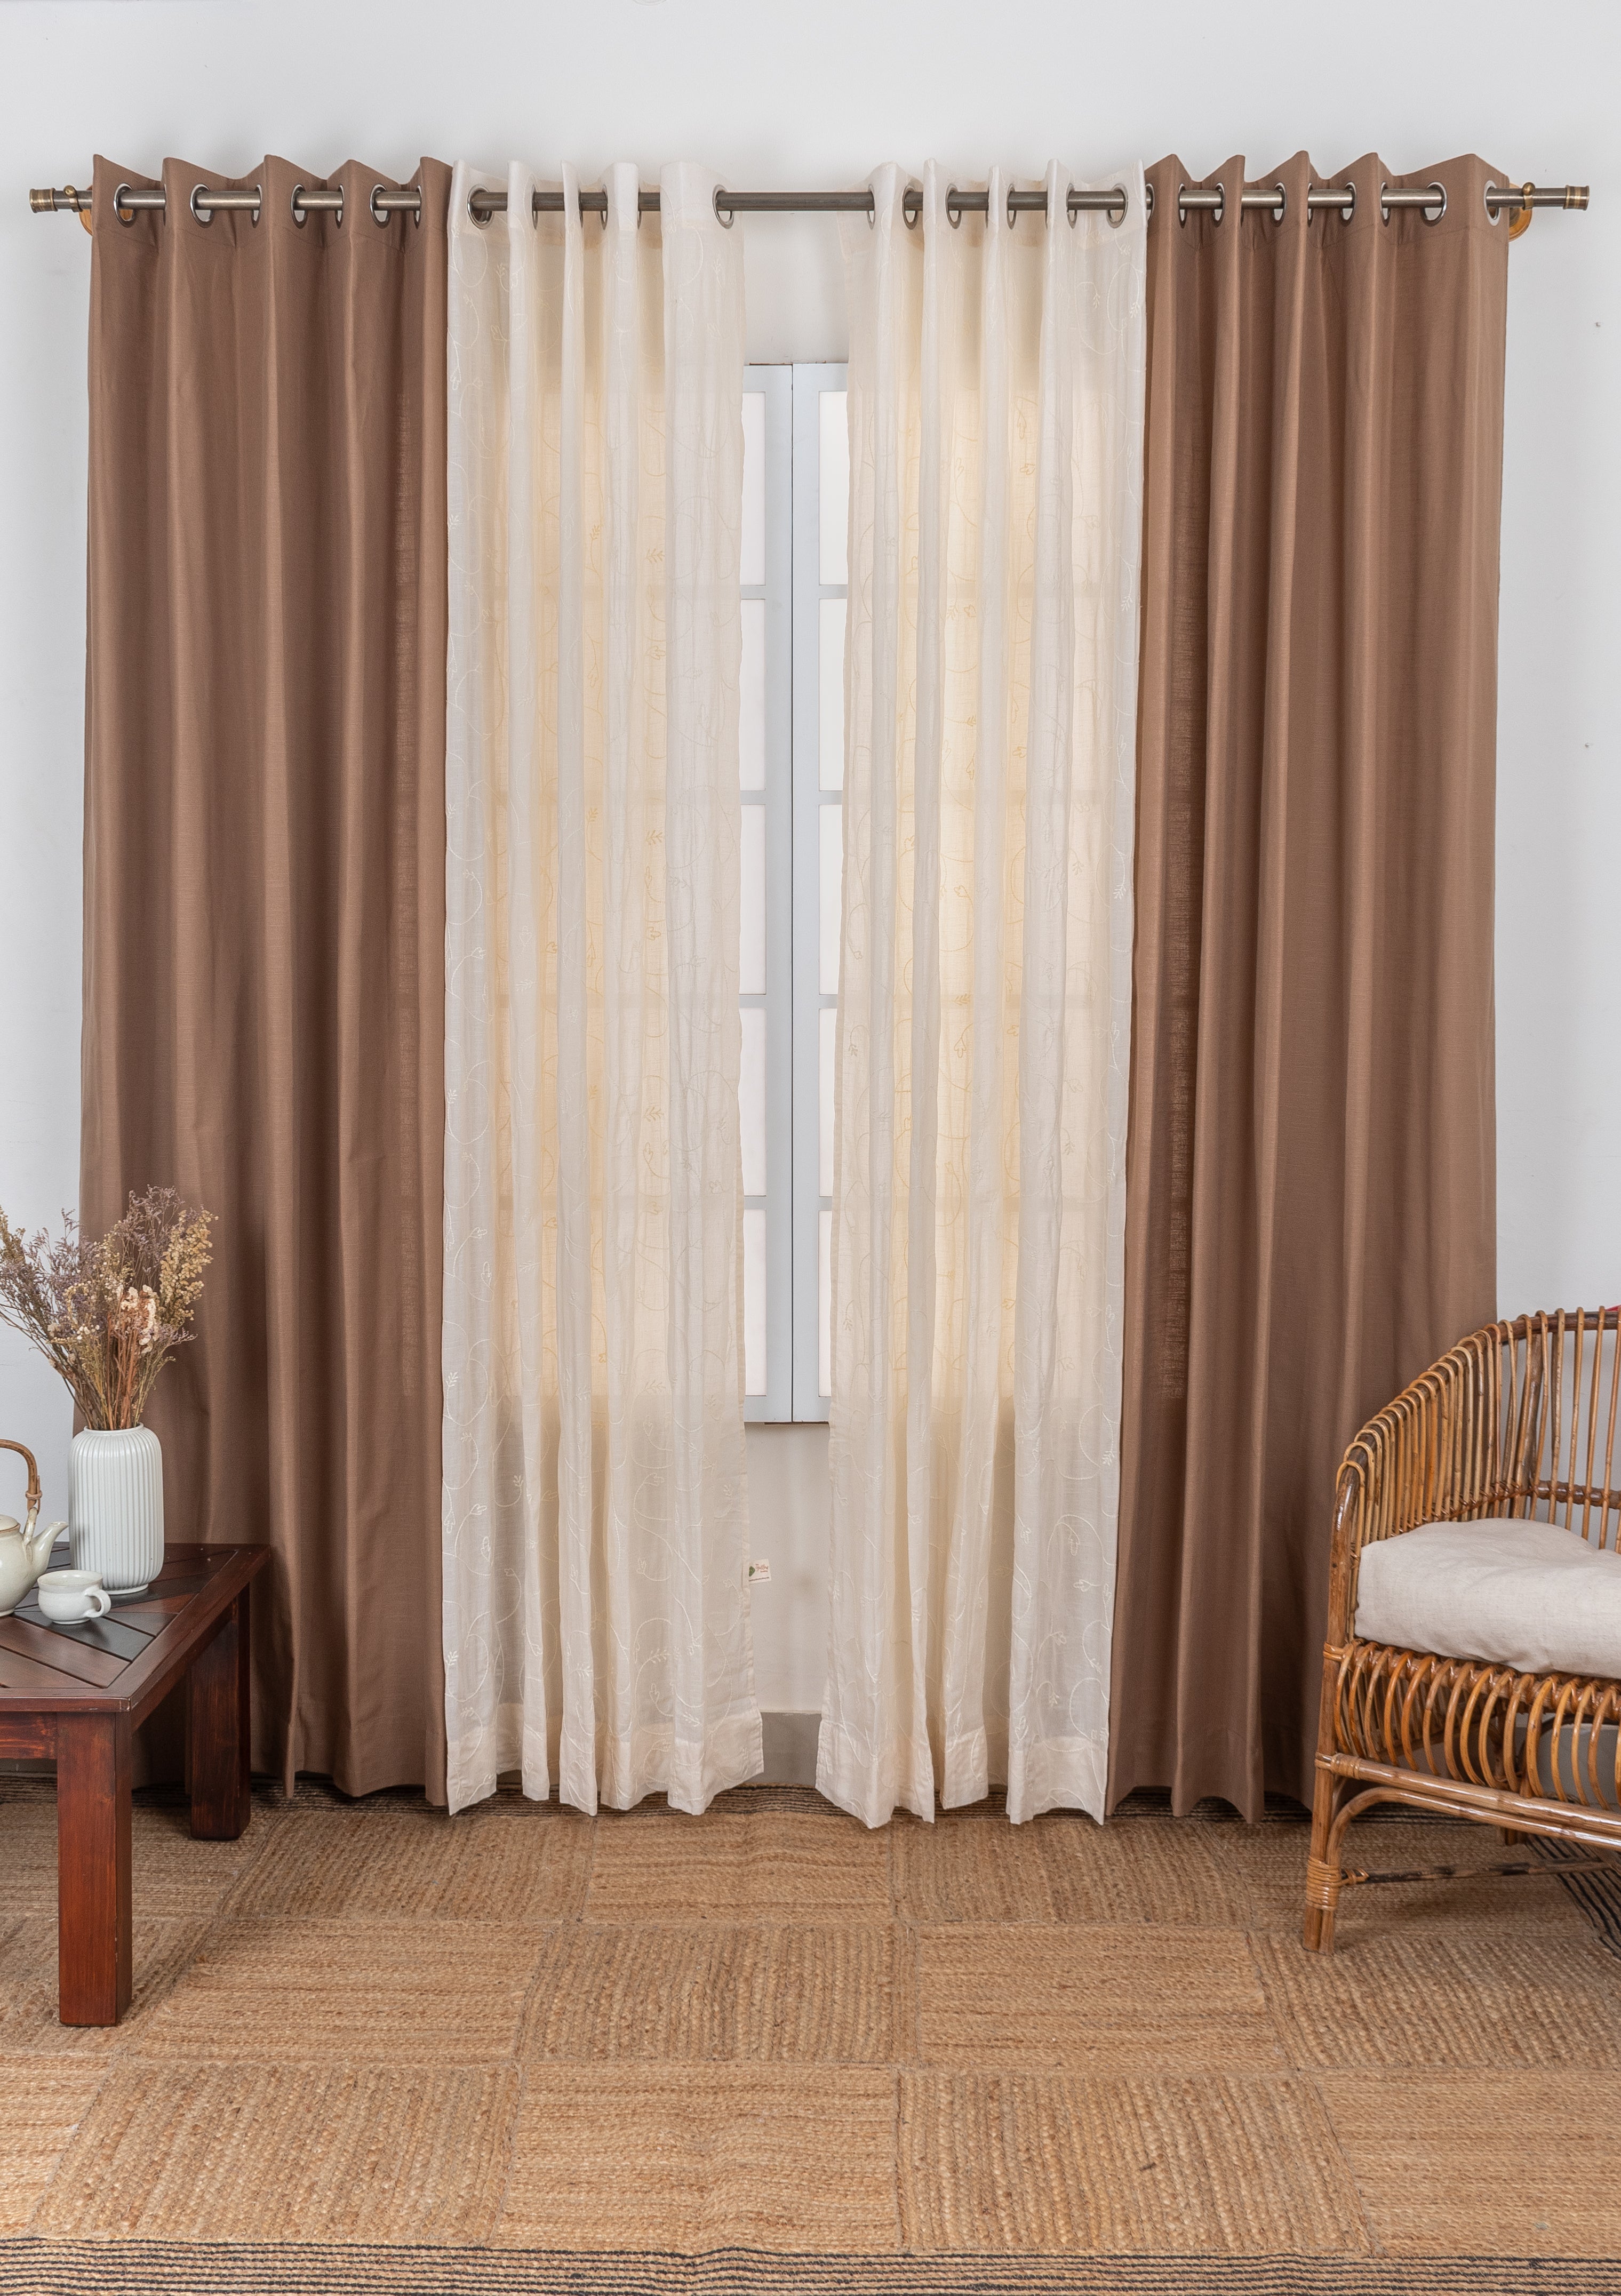 Solid Choclate brown cotton curtain with Ivy vines cream embroidered sheer 100% cotton curtains for living room - Set of 4